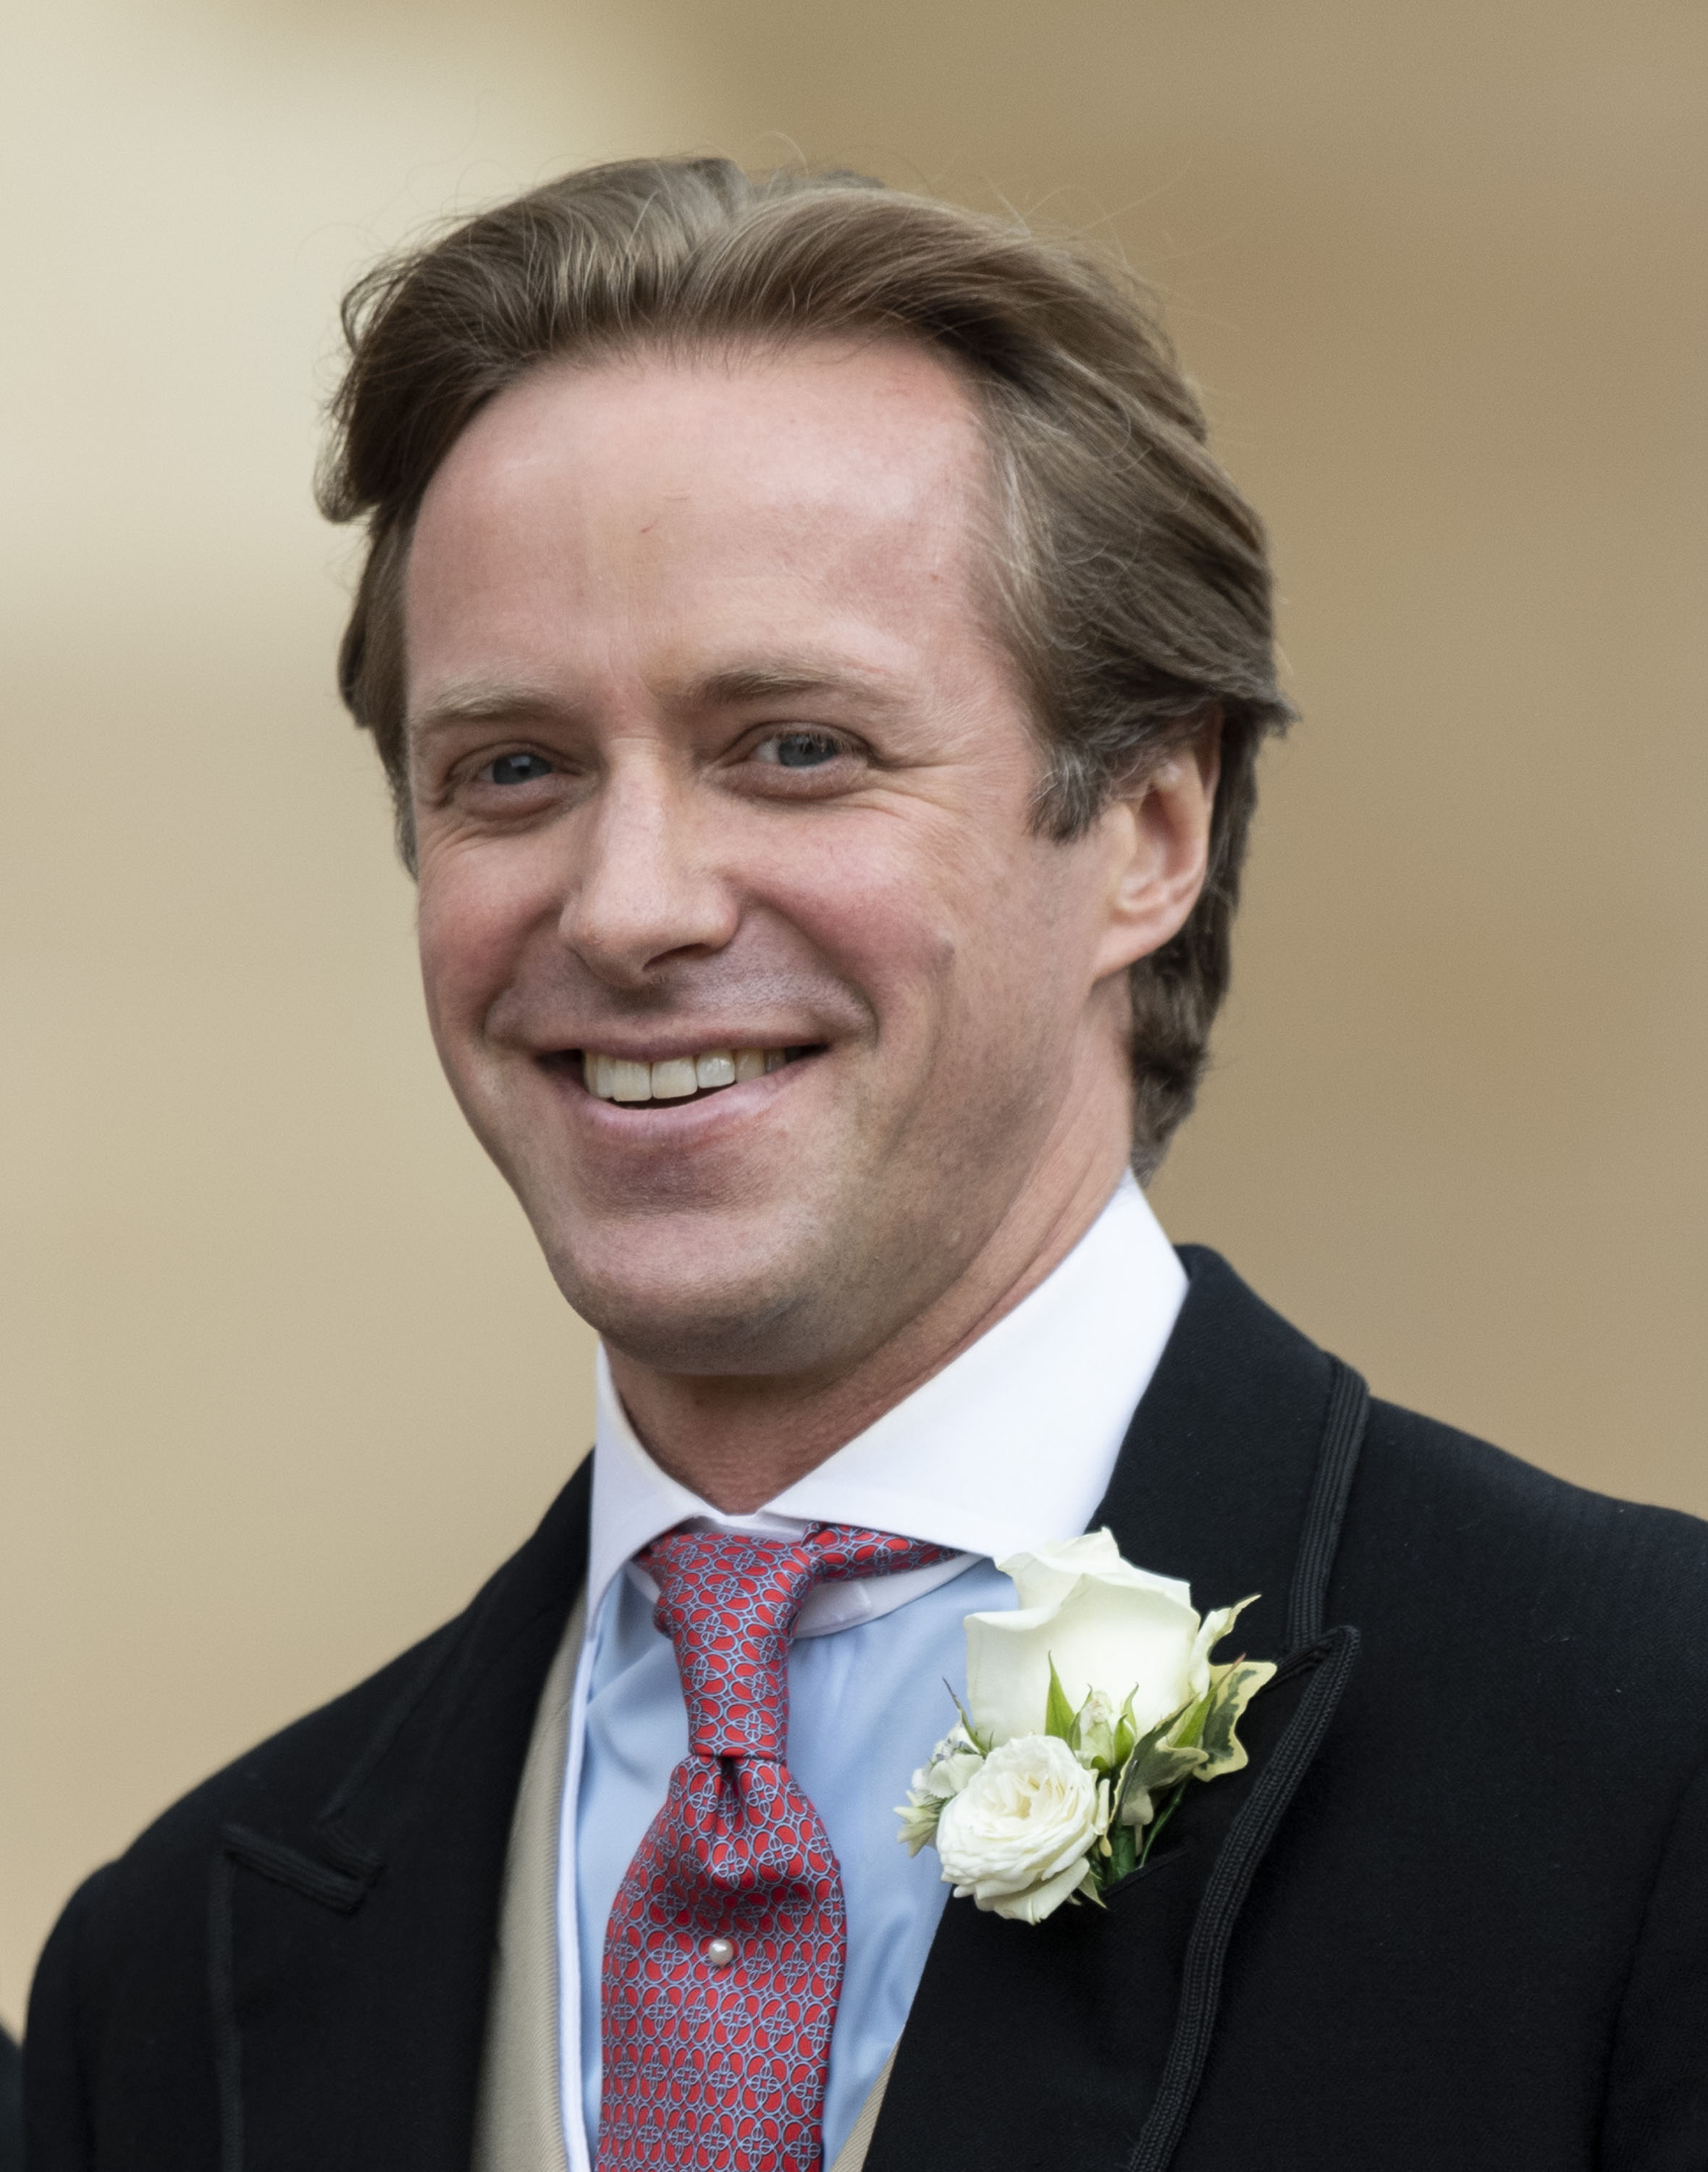 Thomas Kingston on his wedding day in Windsor, England on May 18, 2019 | Source: Getty Images